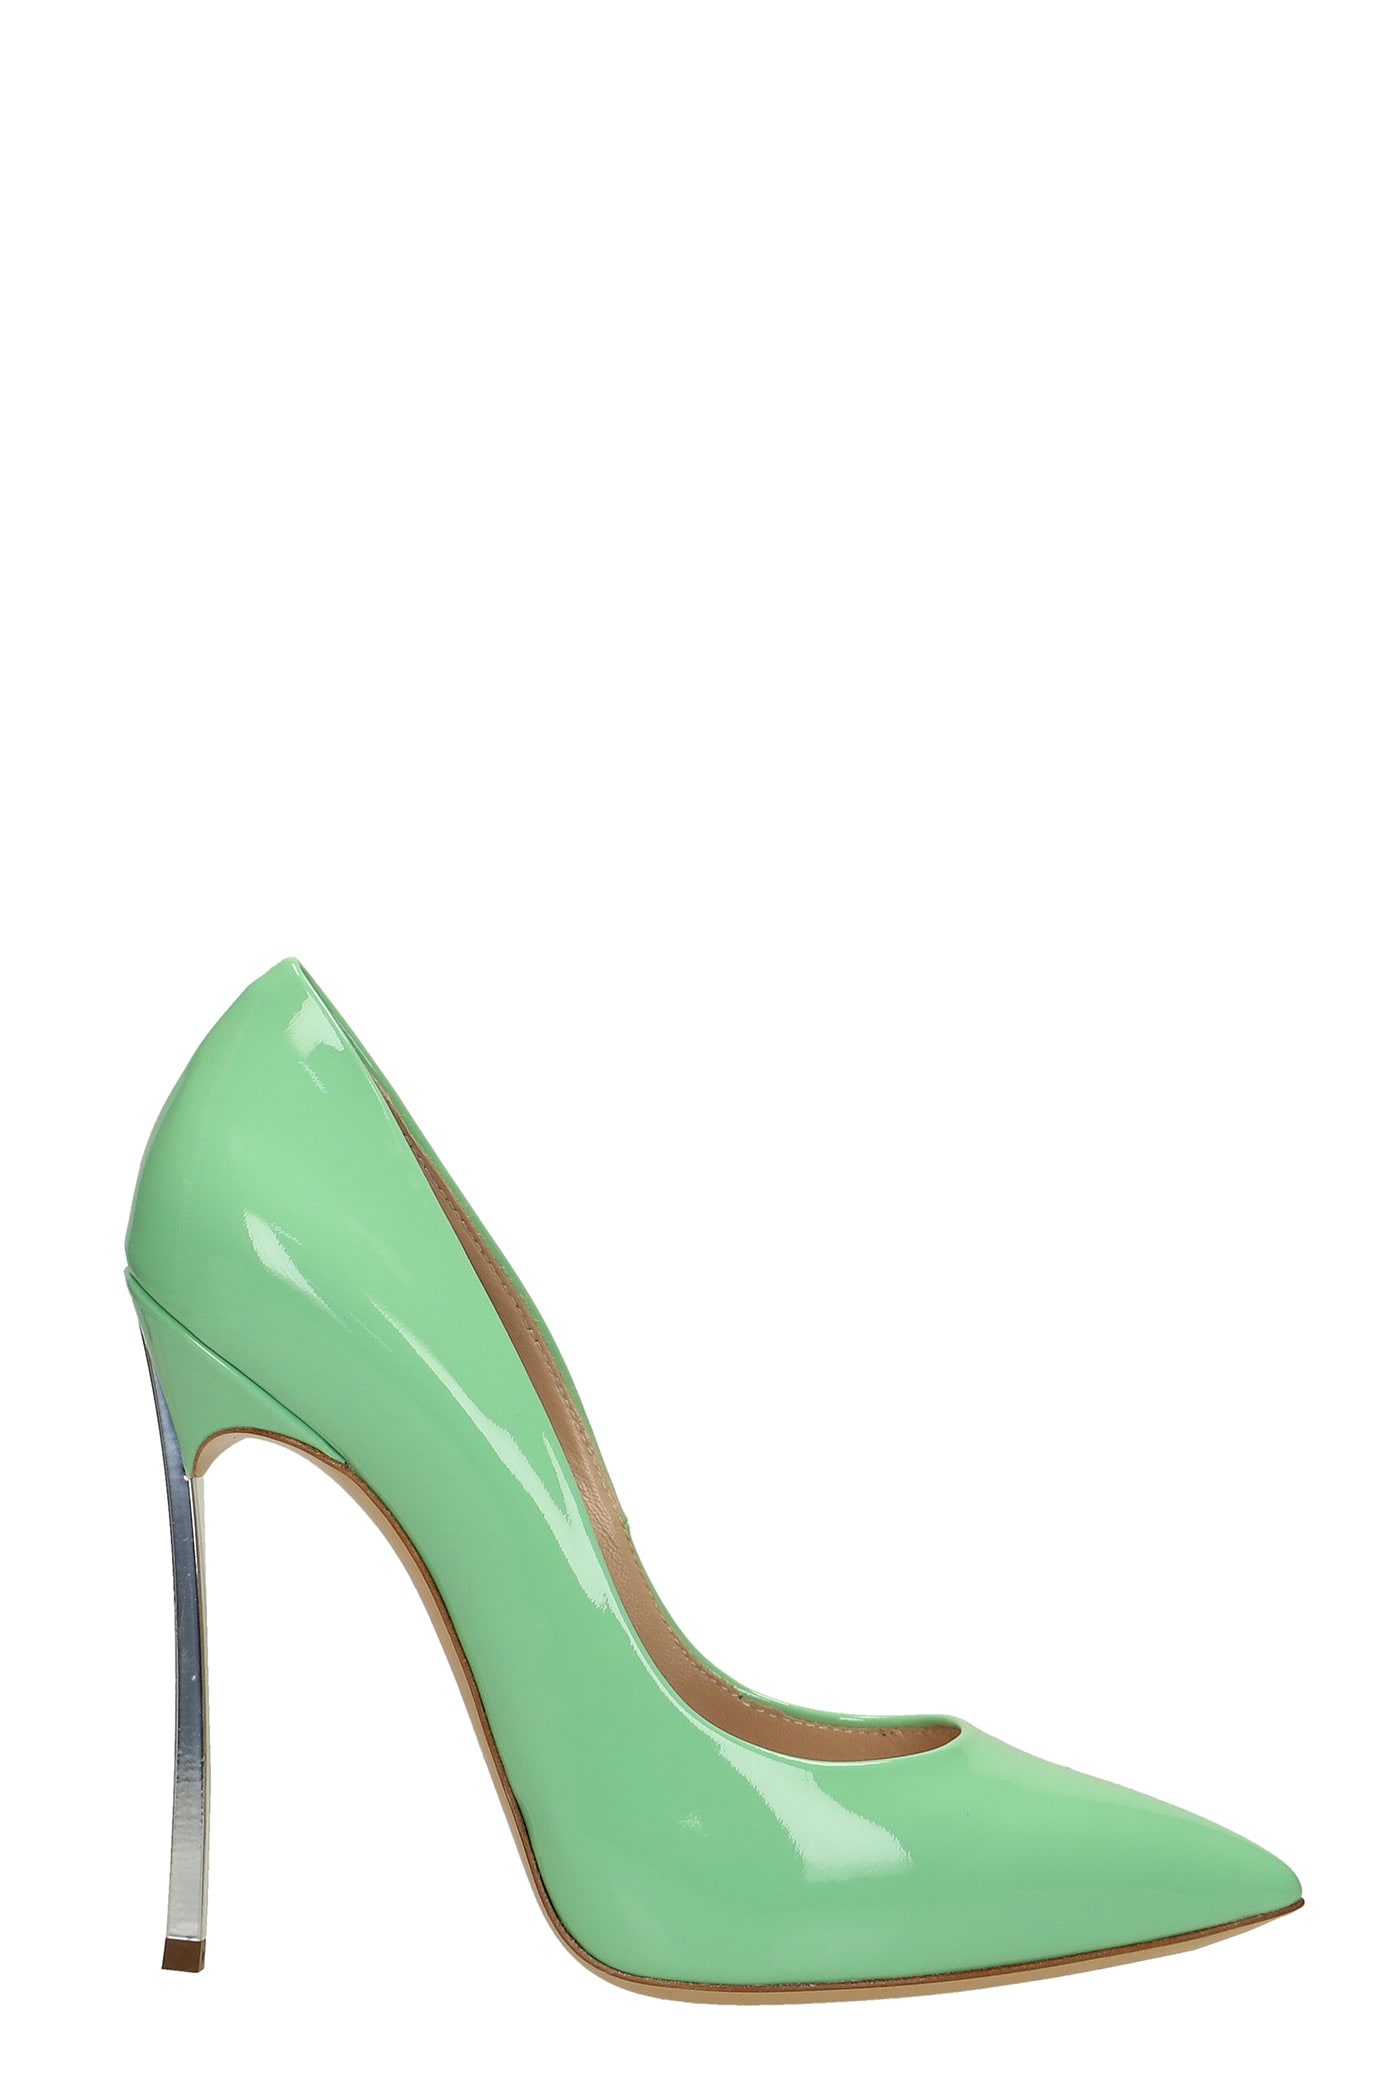 Casadei Pumps In Green Patent Leather